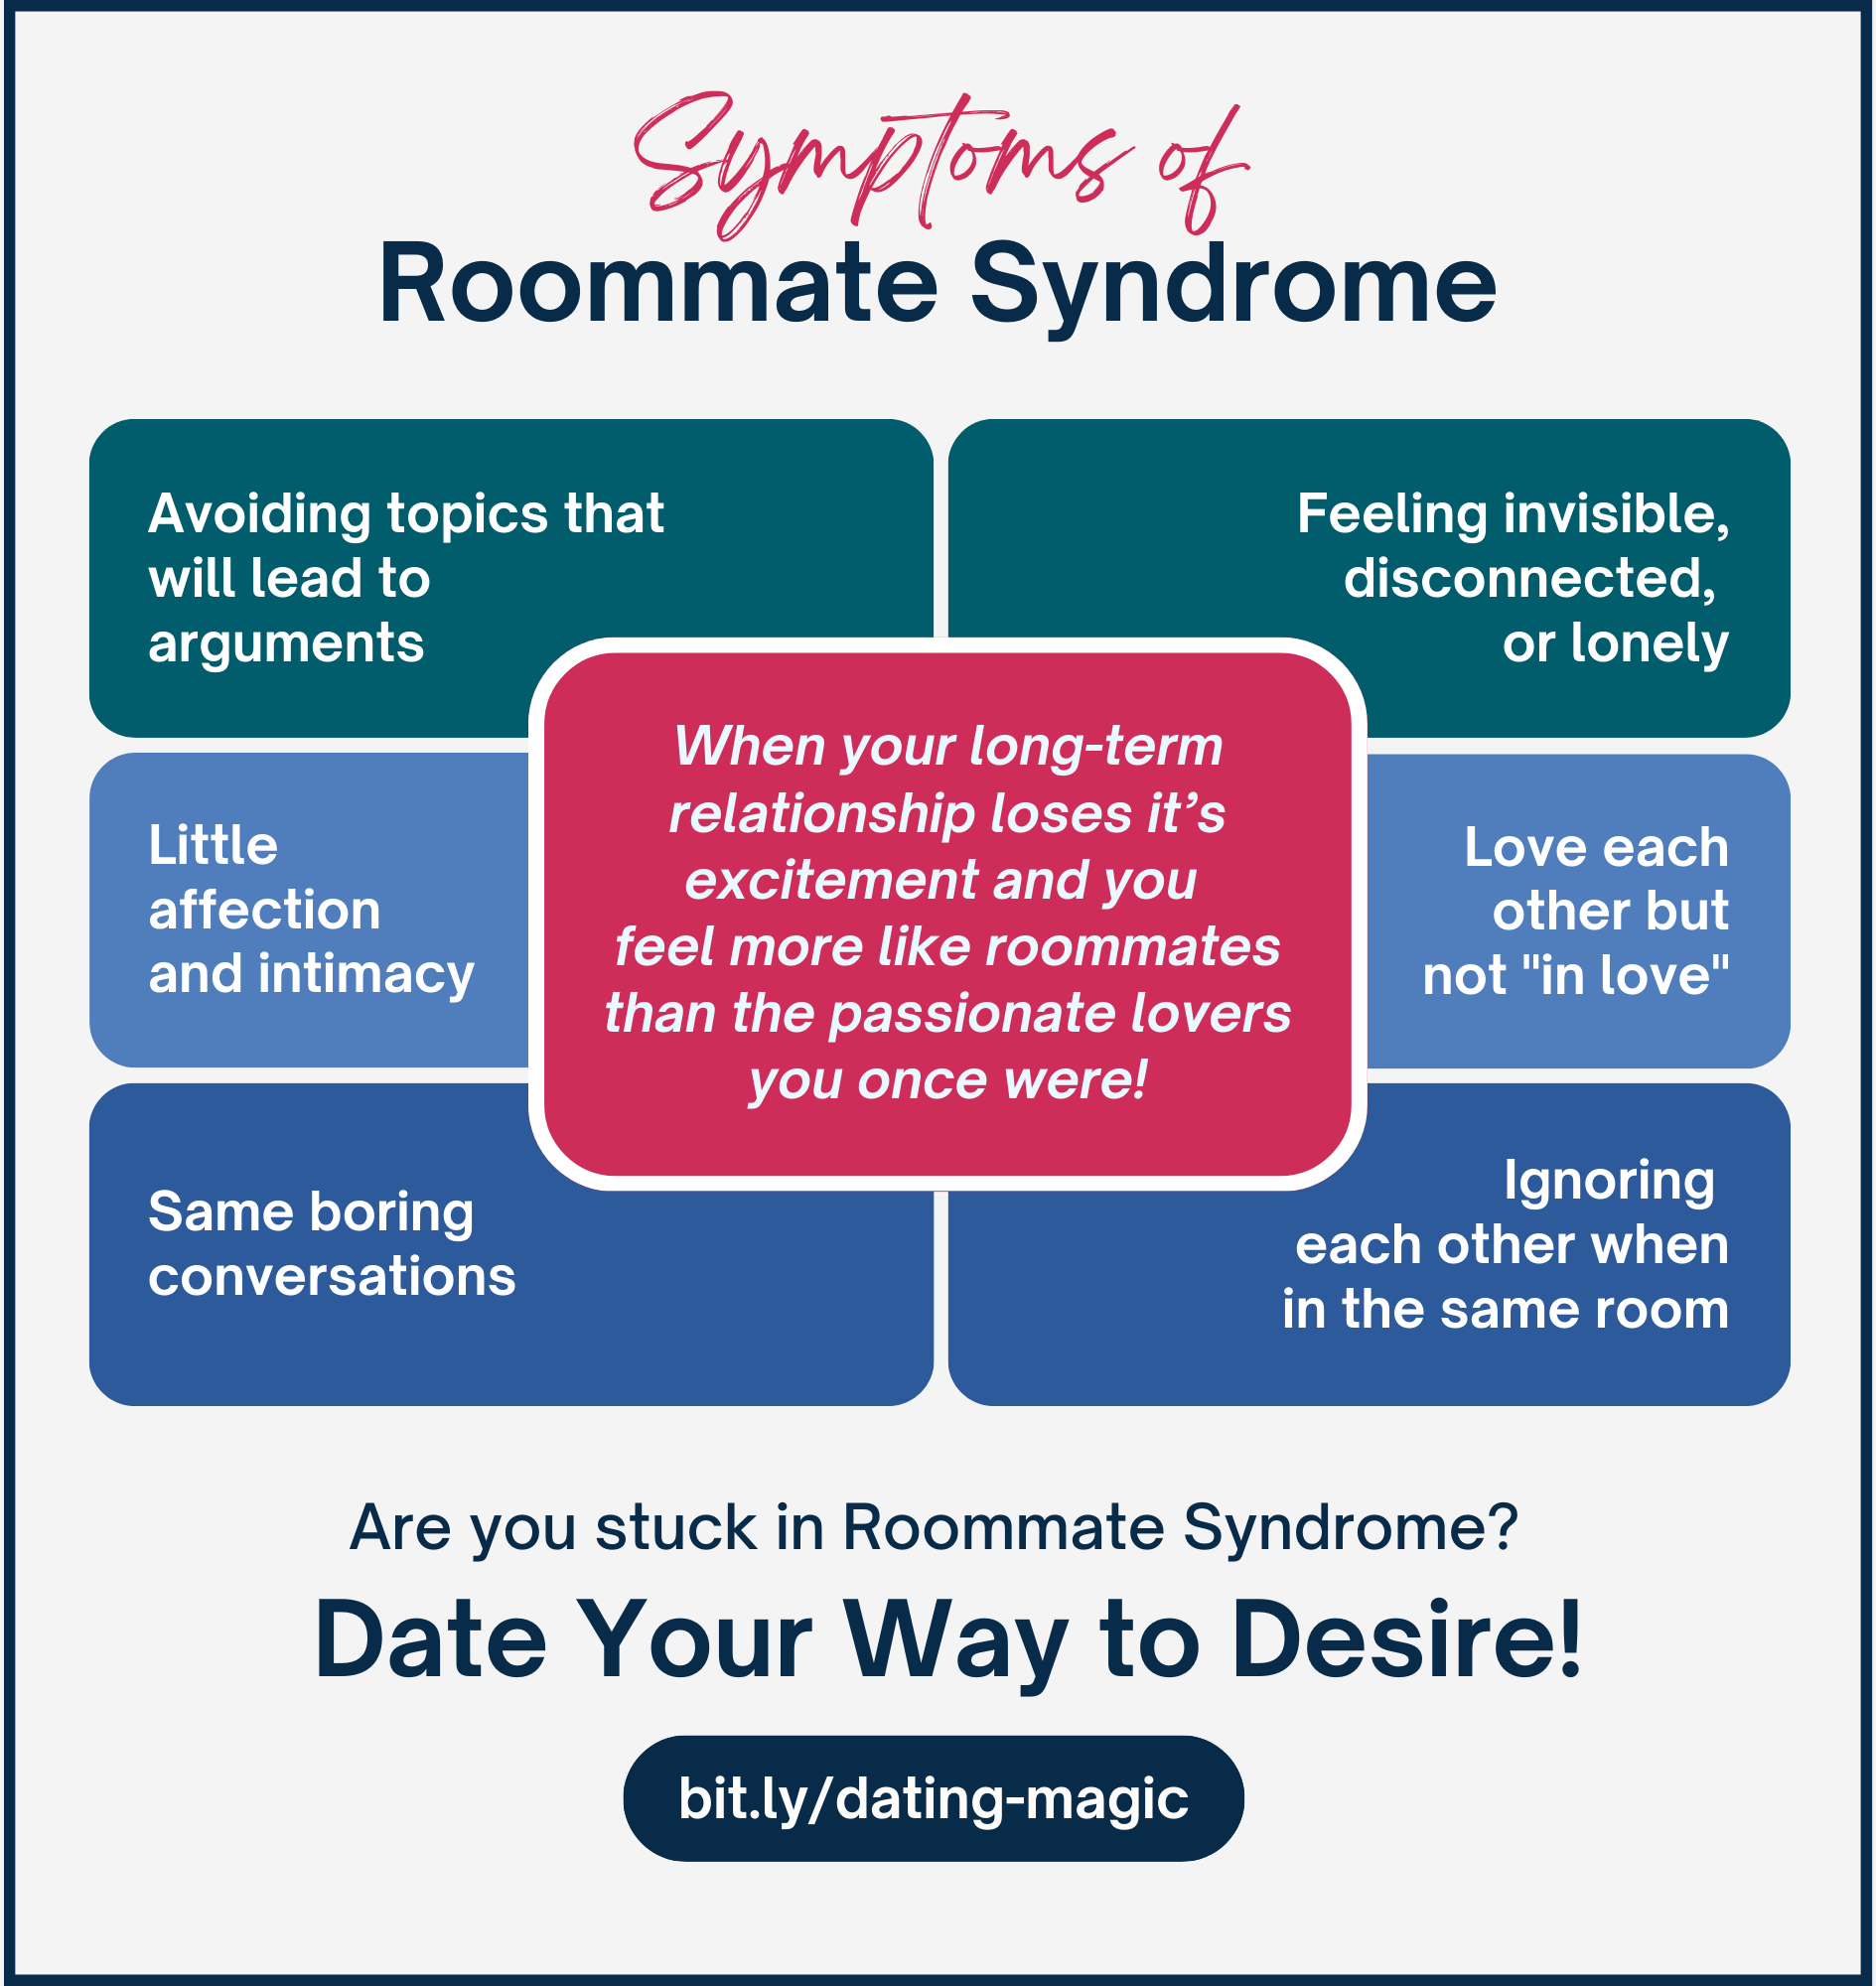 Symptoms of Roommate Syndrome